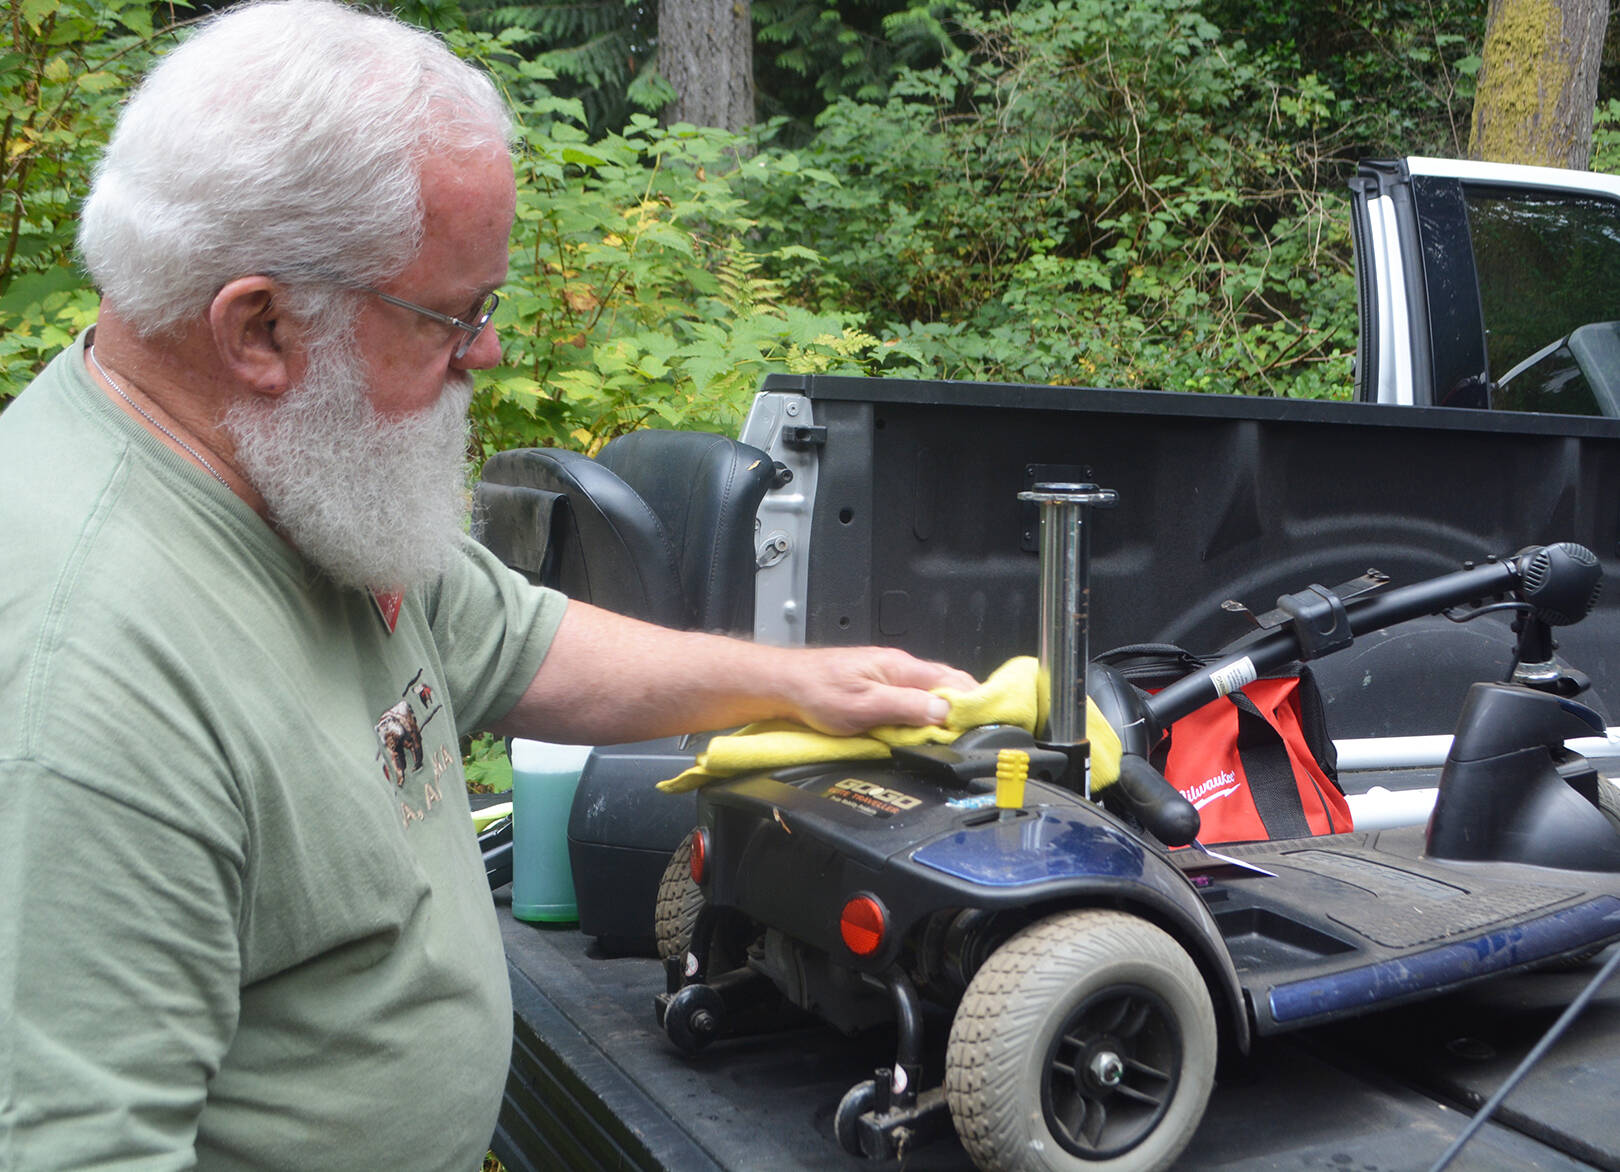 After returning some loaned items back to BI, Mike Slavin cleans up some equipment to take to the Bremerton area to other people who need to borrow it.